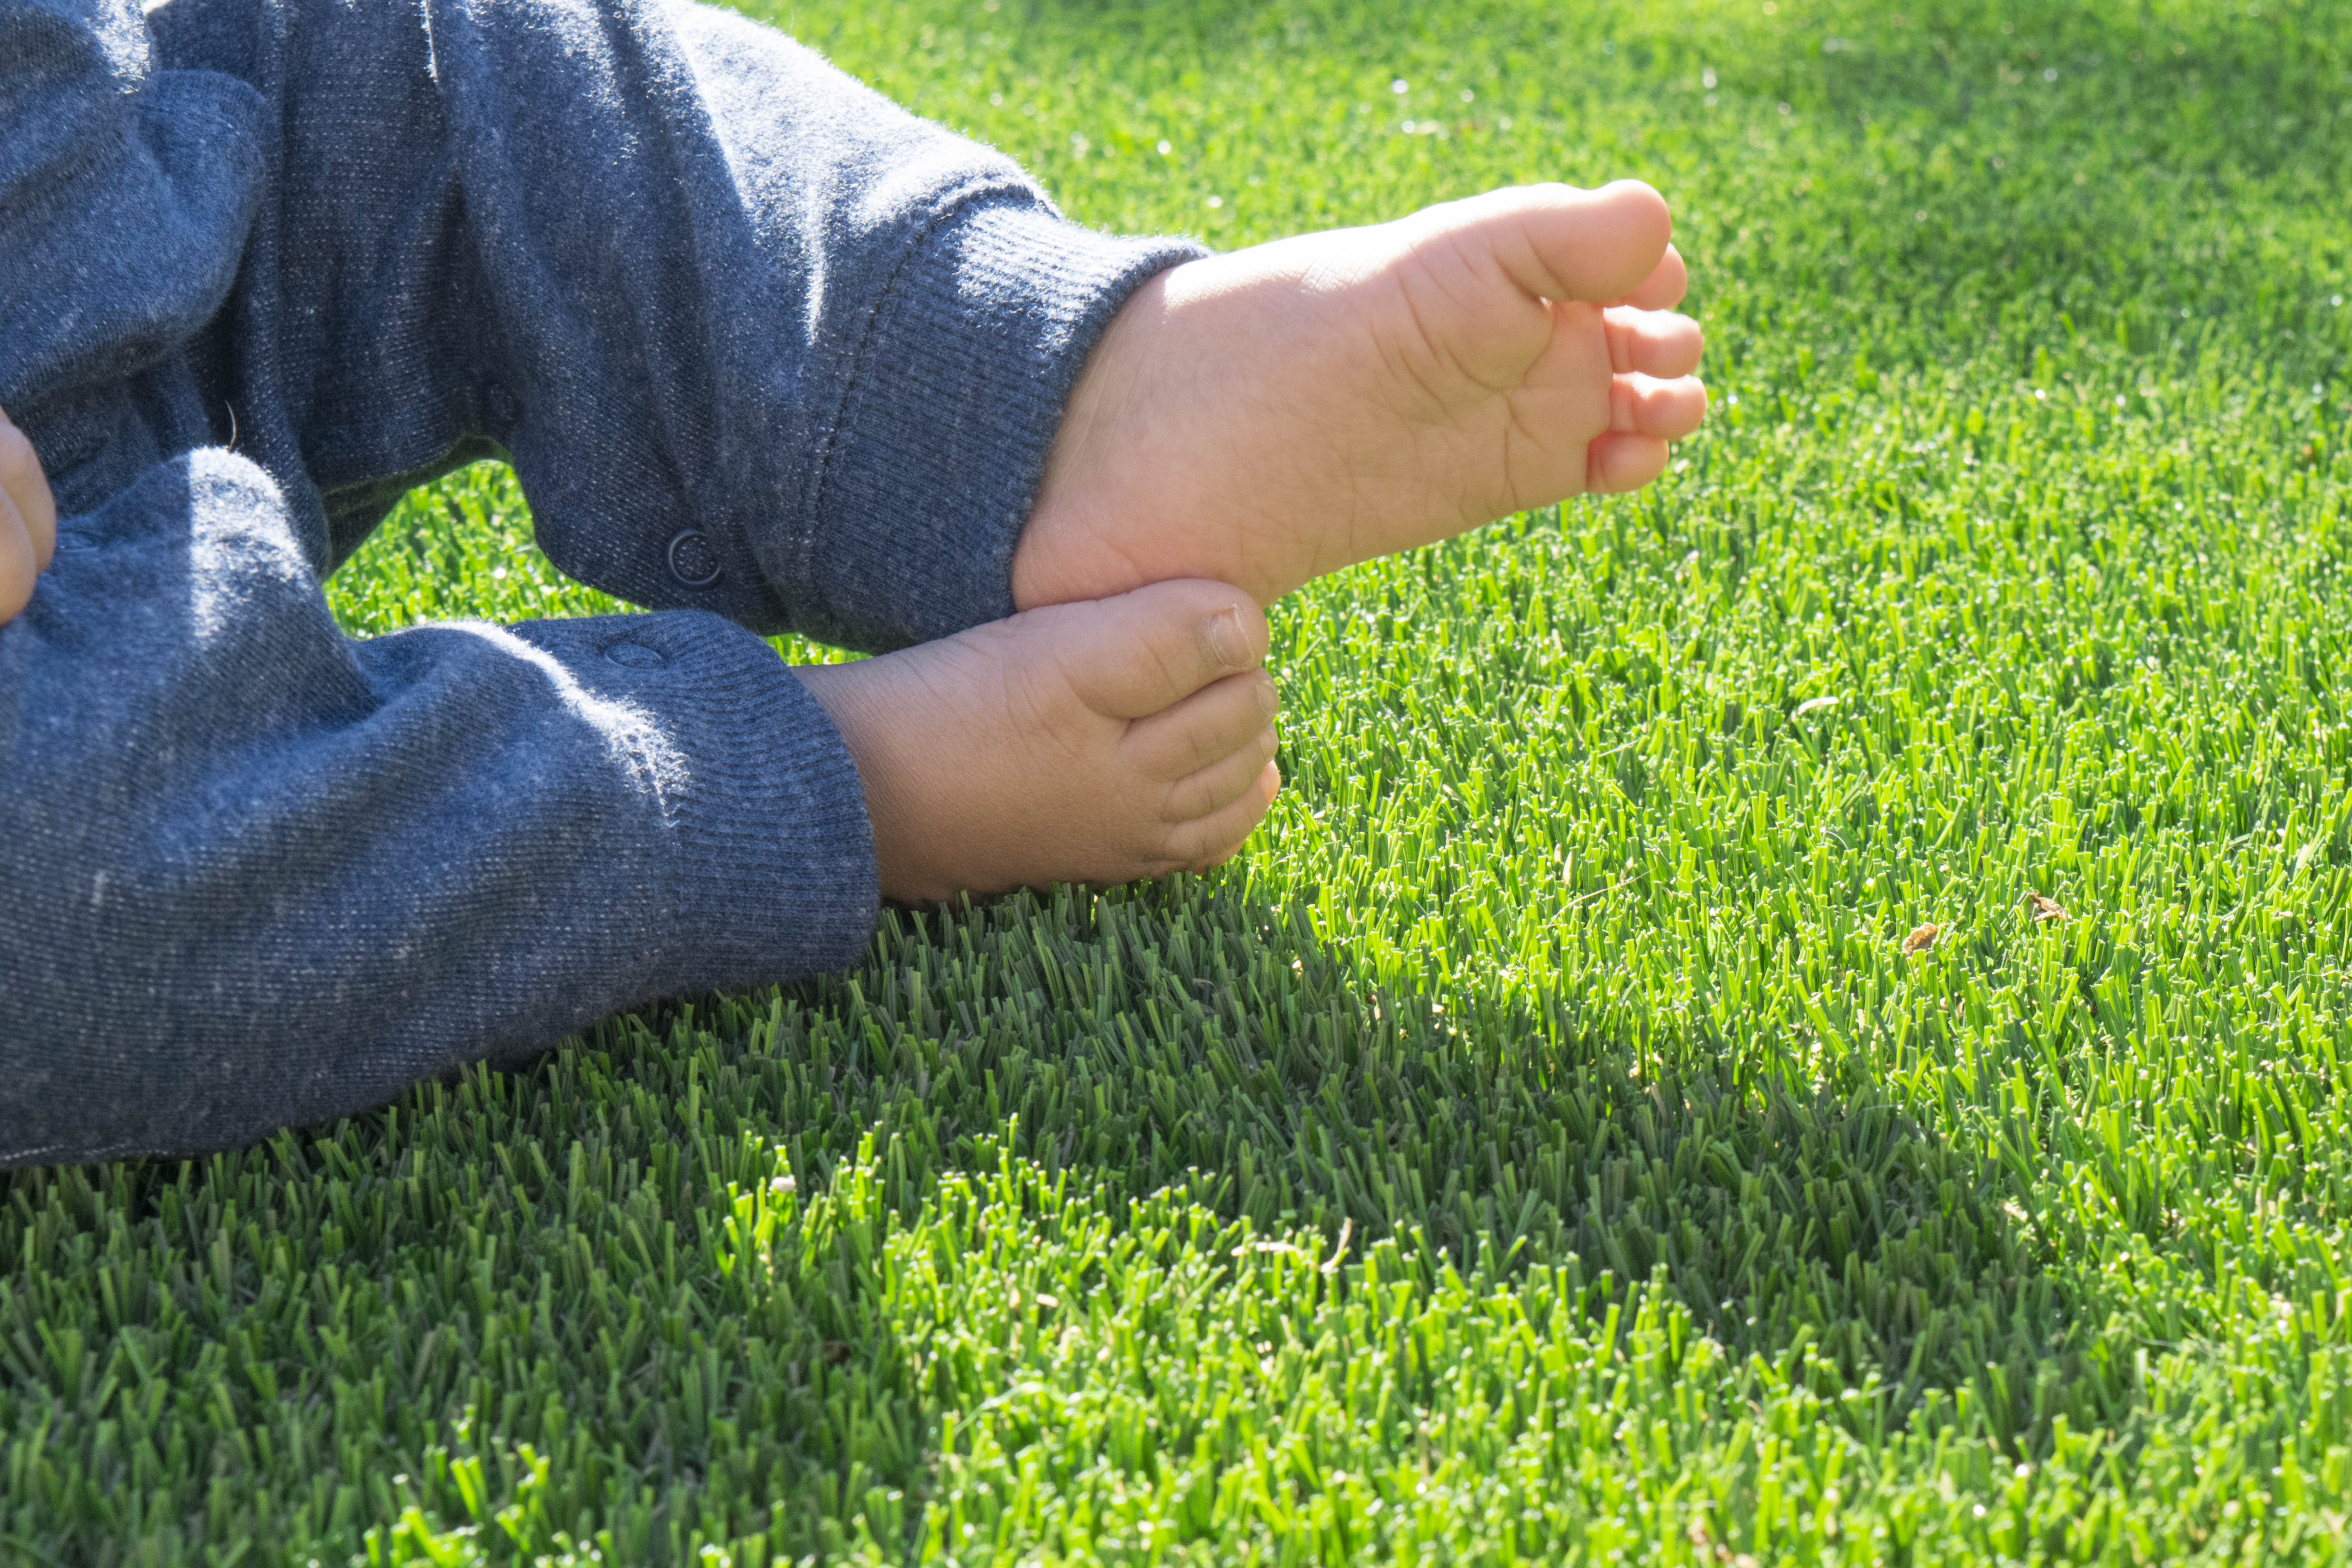 From Daycares & Playgrounds to Your Backyard: Synthetic Grass Makes the Perfect Landing for Kids 3